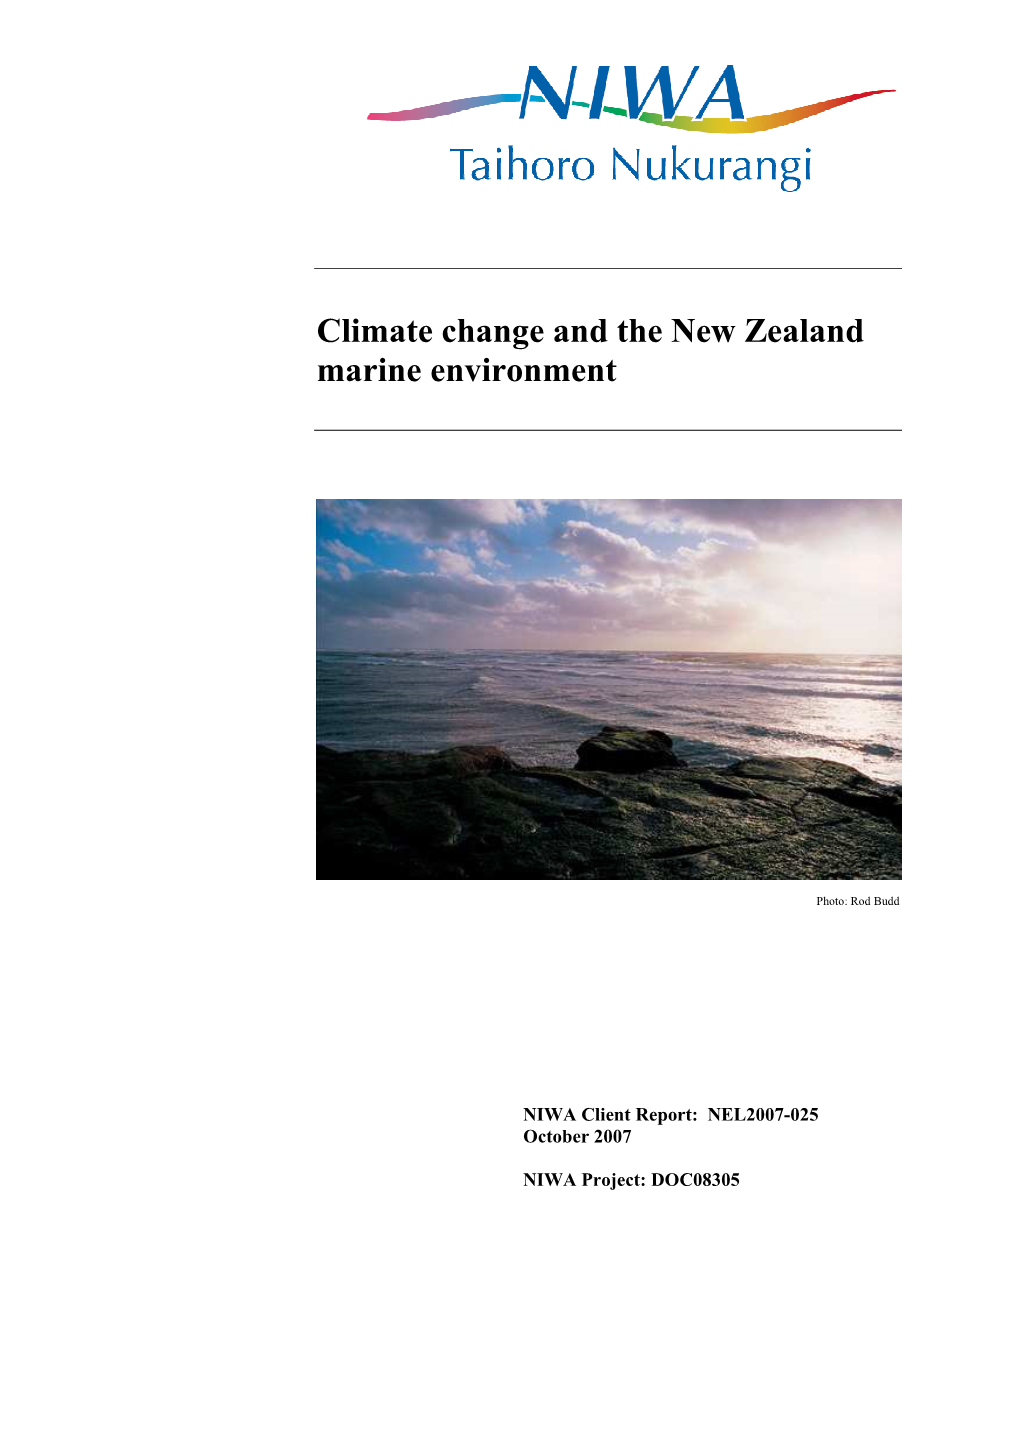 Climate Change and the New Zealand Marine Environment